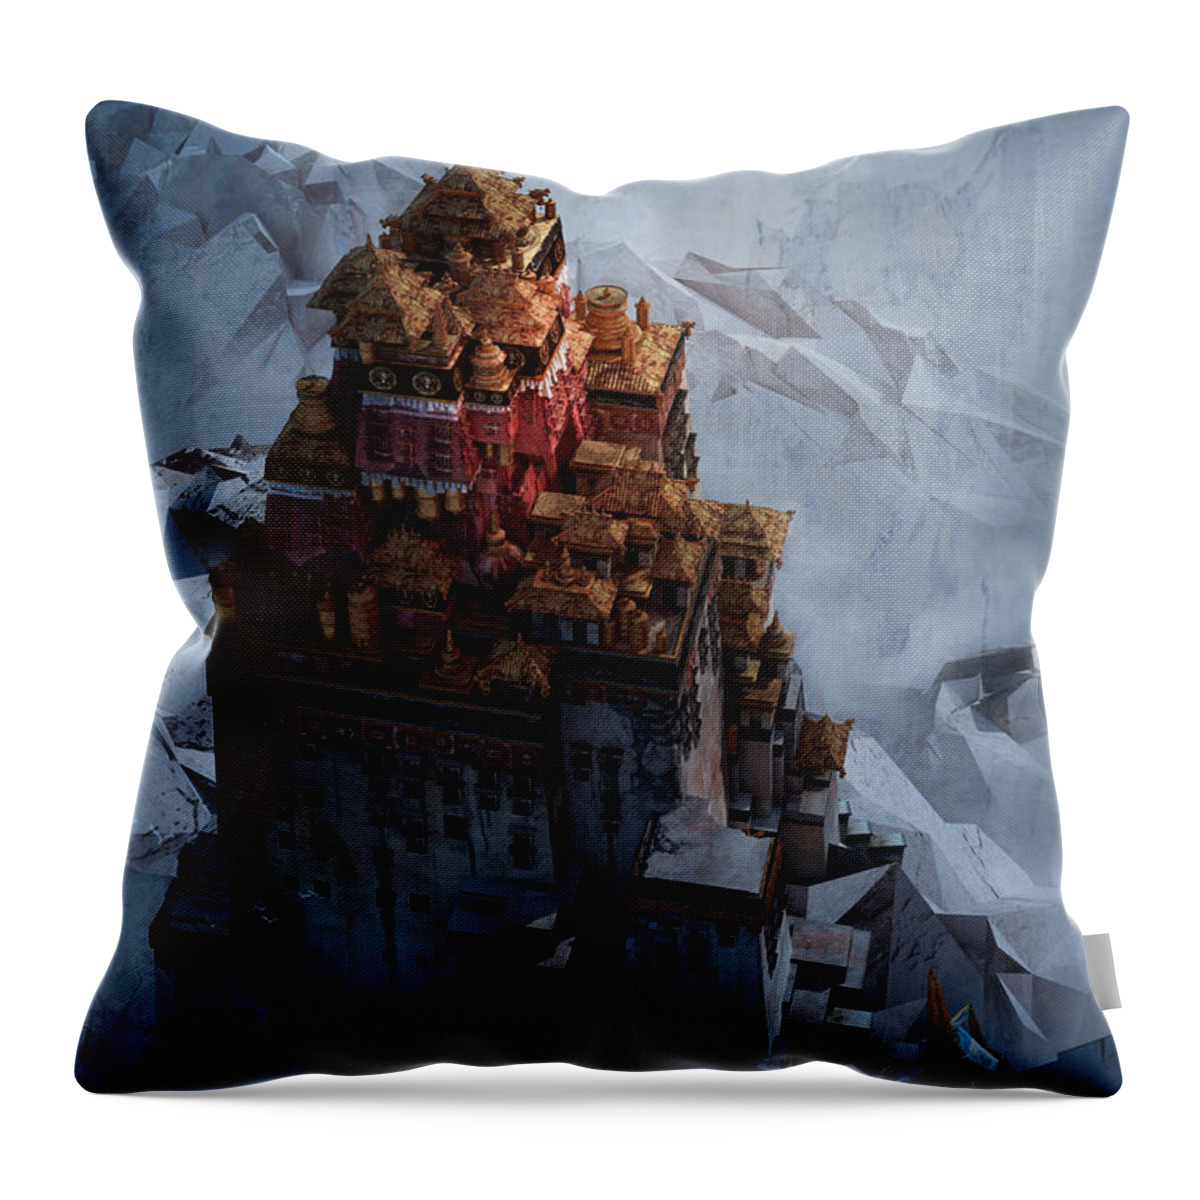 Landscape Throw Pillow featuring the digital art Wonders Holy Temple by Te Hu